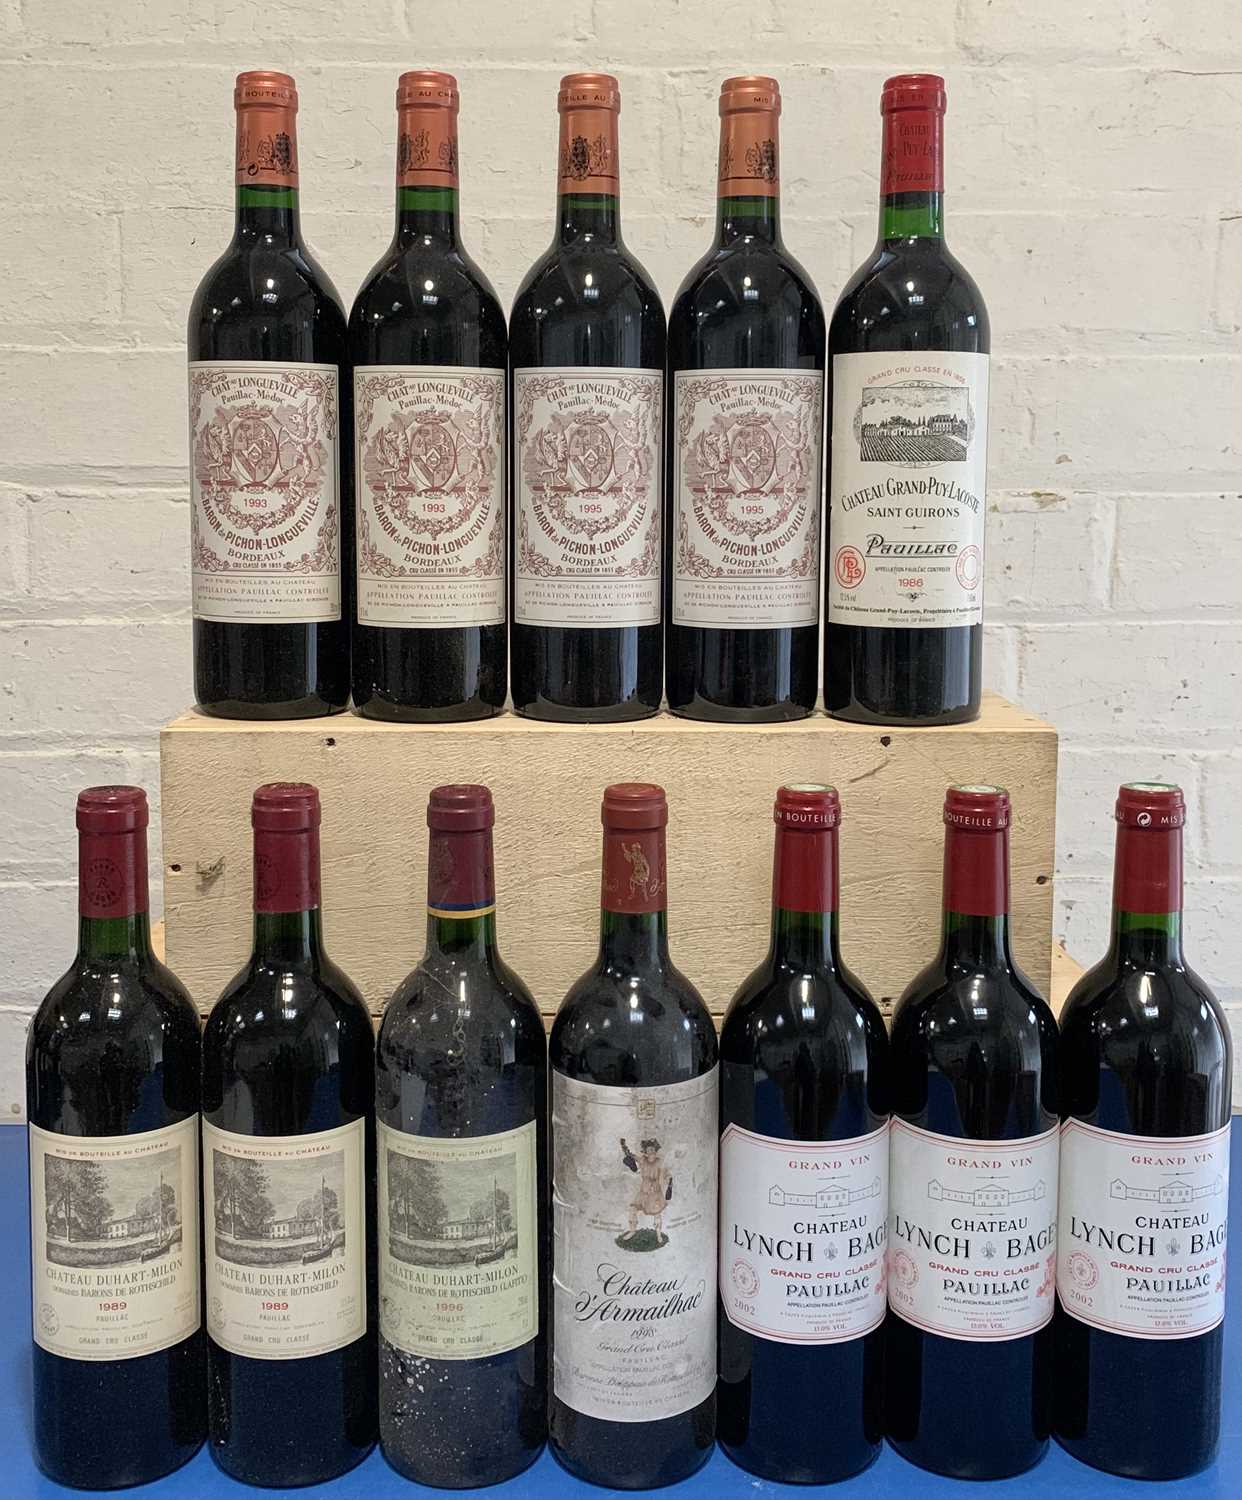 Lot 44 - 12 Bottles Mature Classified Growth Pauillac in excellent condition